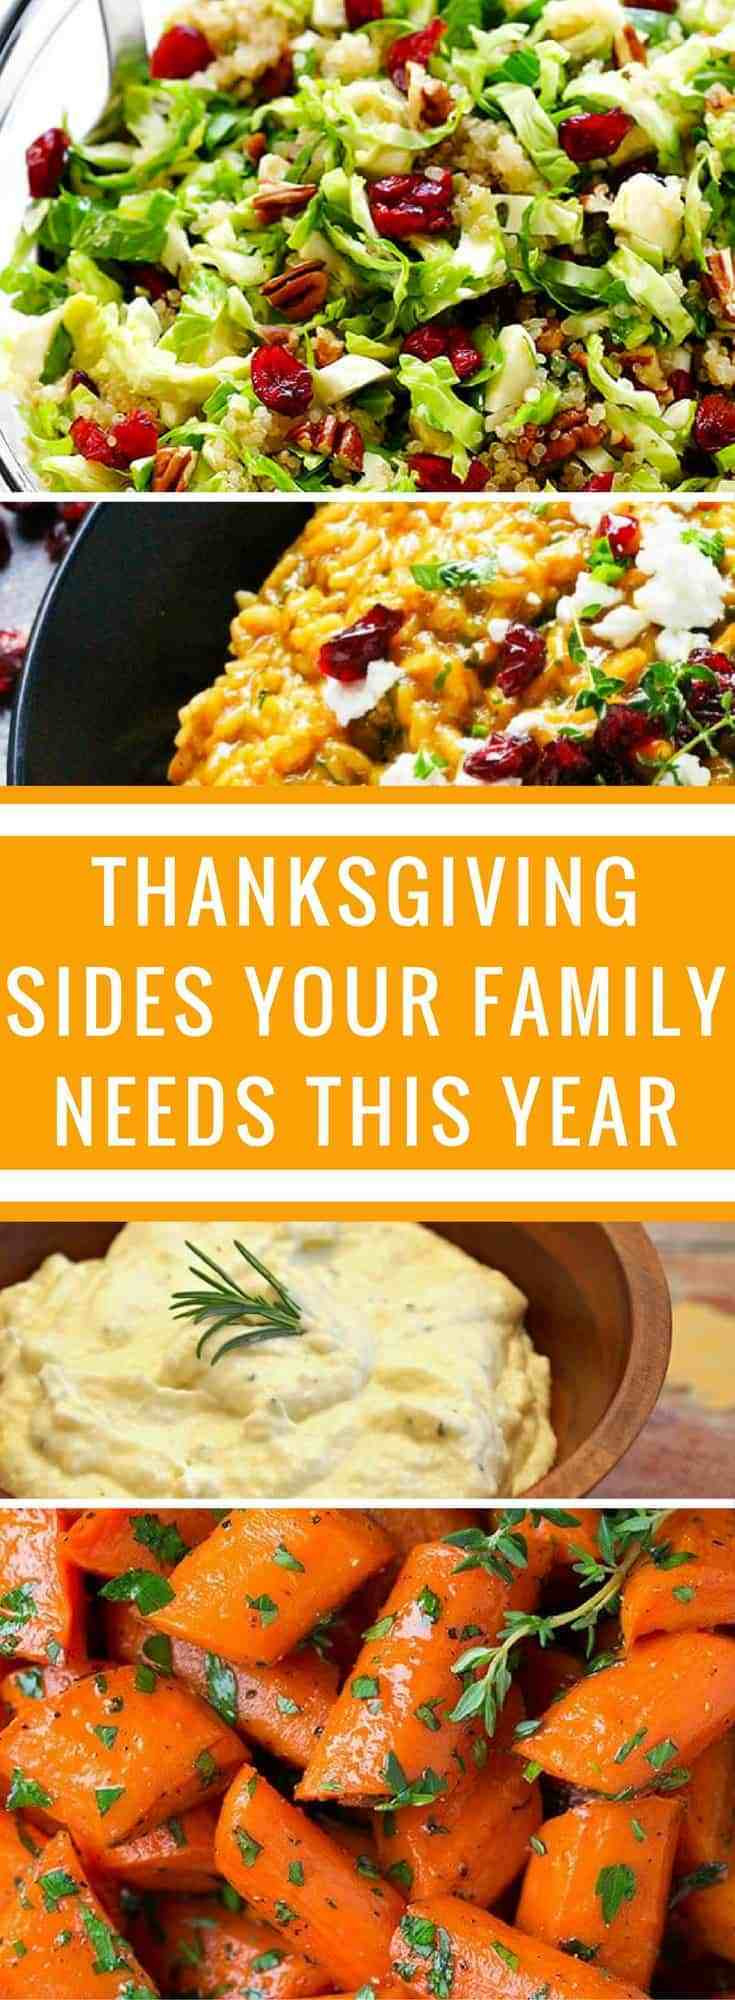 Healthy Thanksgiving Sides
 15 Healthy Thanksgiving Sides That Will Make You Stay Fit